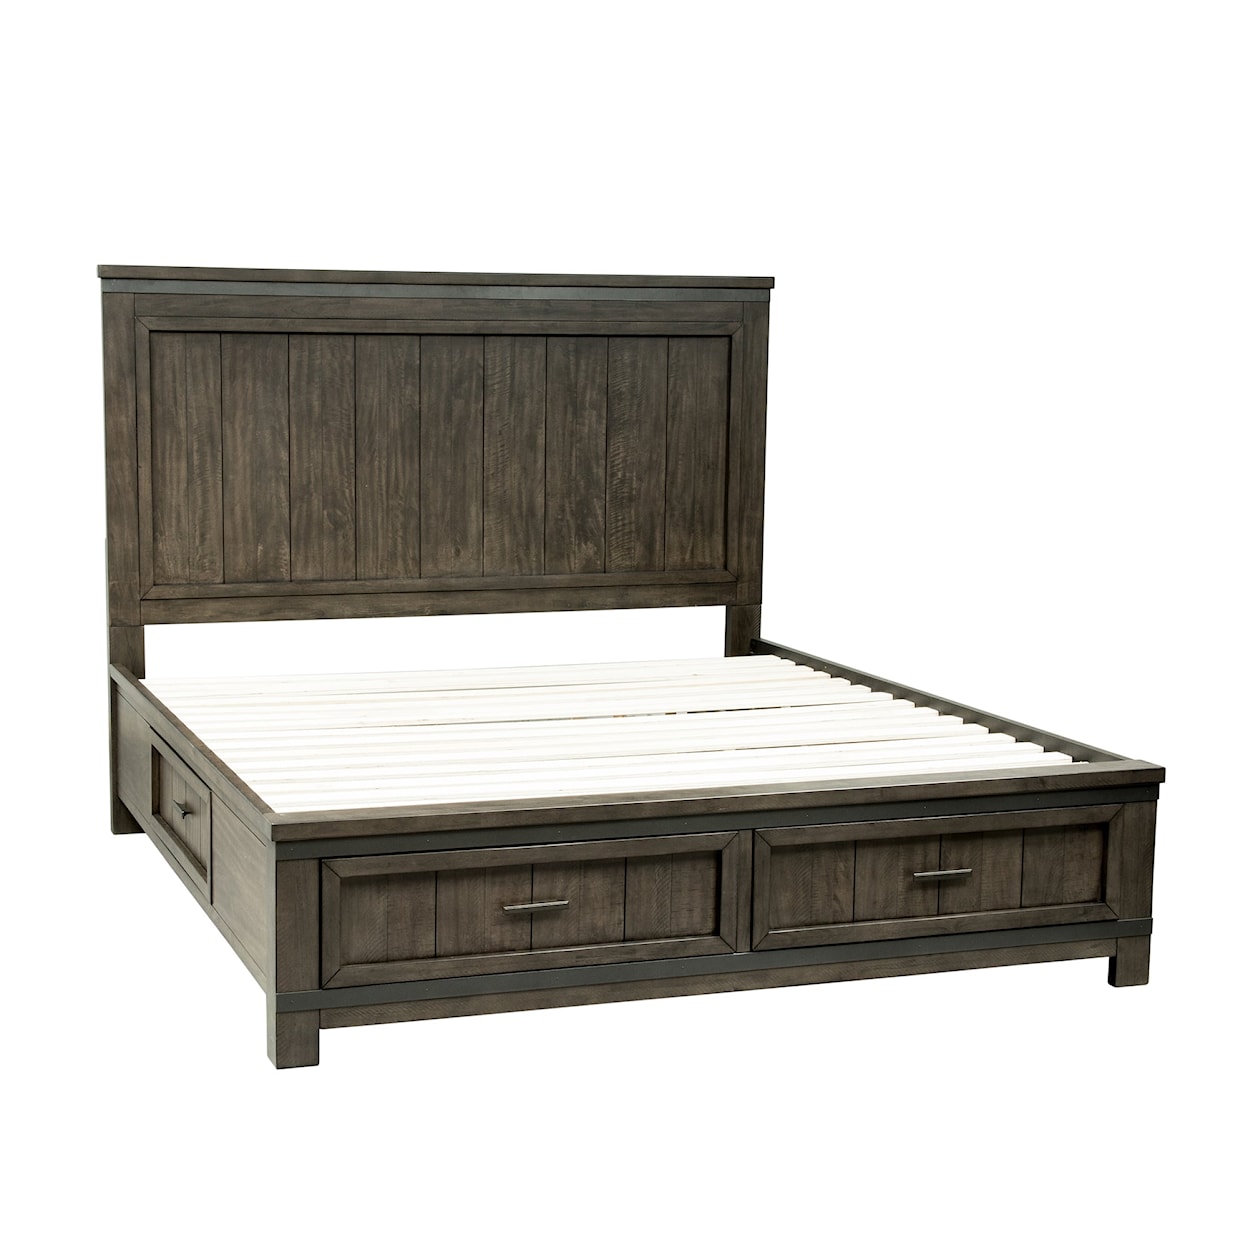 Liberty Furniture Thornwood Hills 5-Piece Two Sided Storage Queen Bed Set